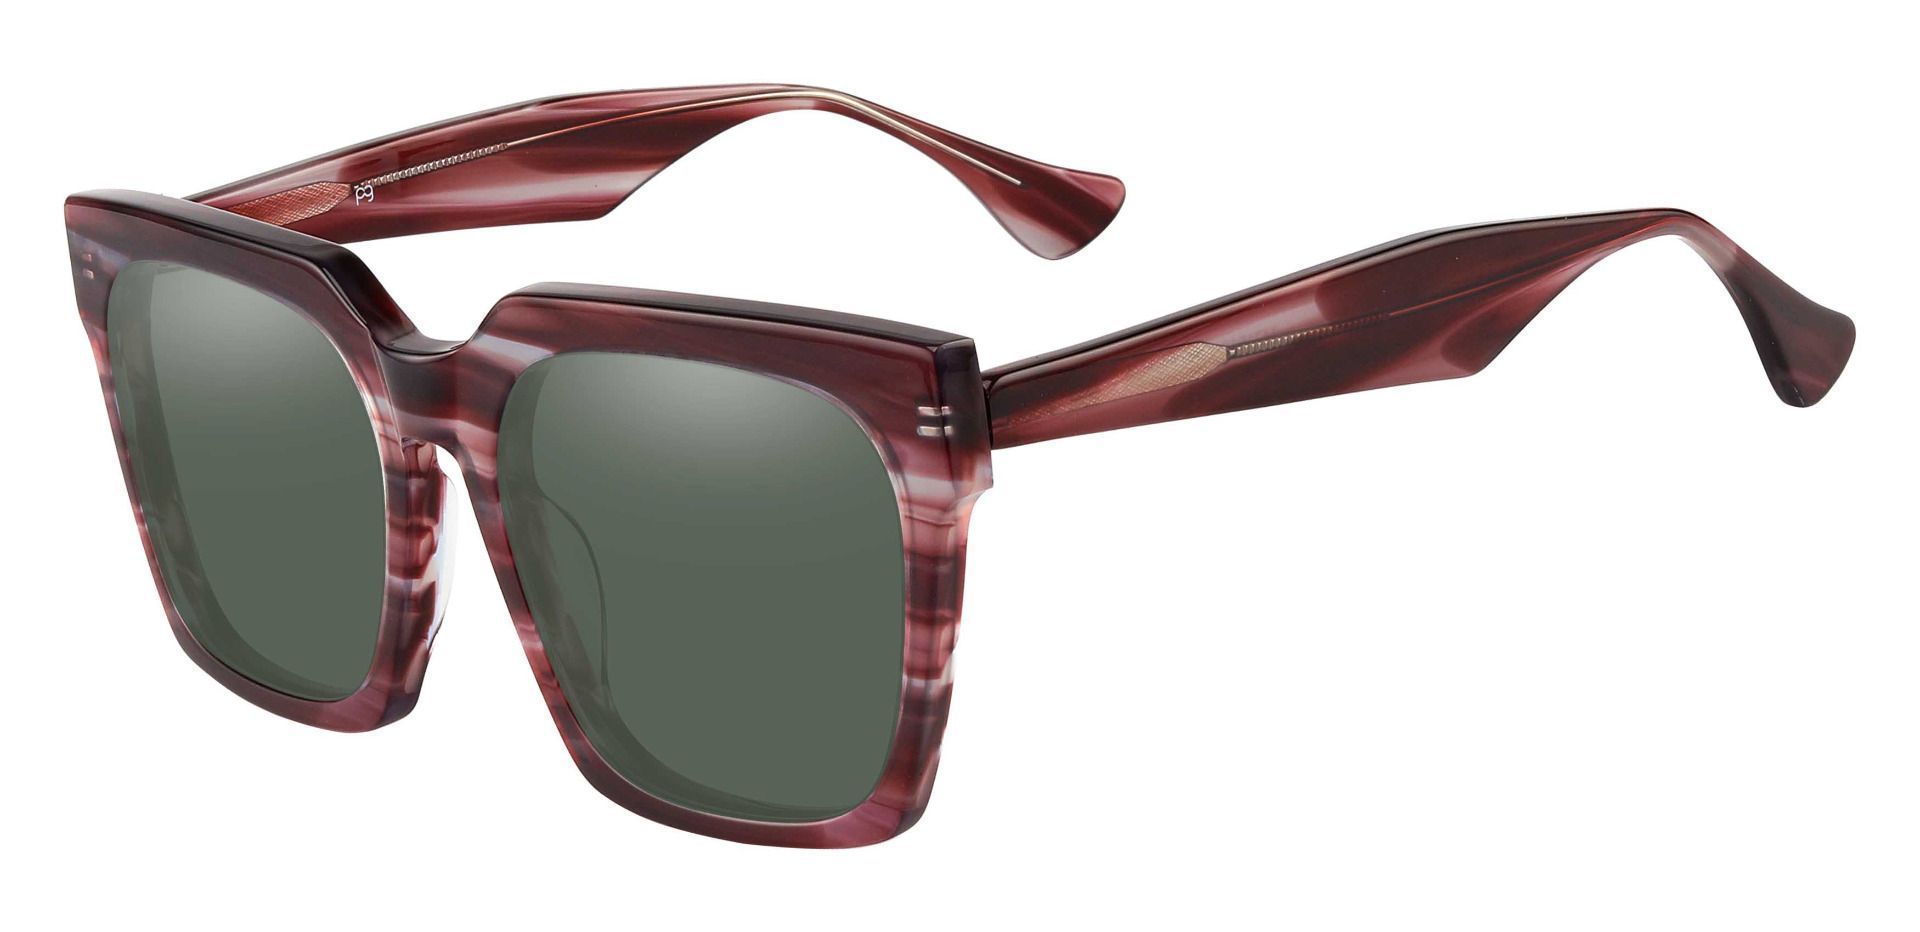 Harlan Square Non-Rx Sunglasses - Striped Frame With Green Lenses